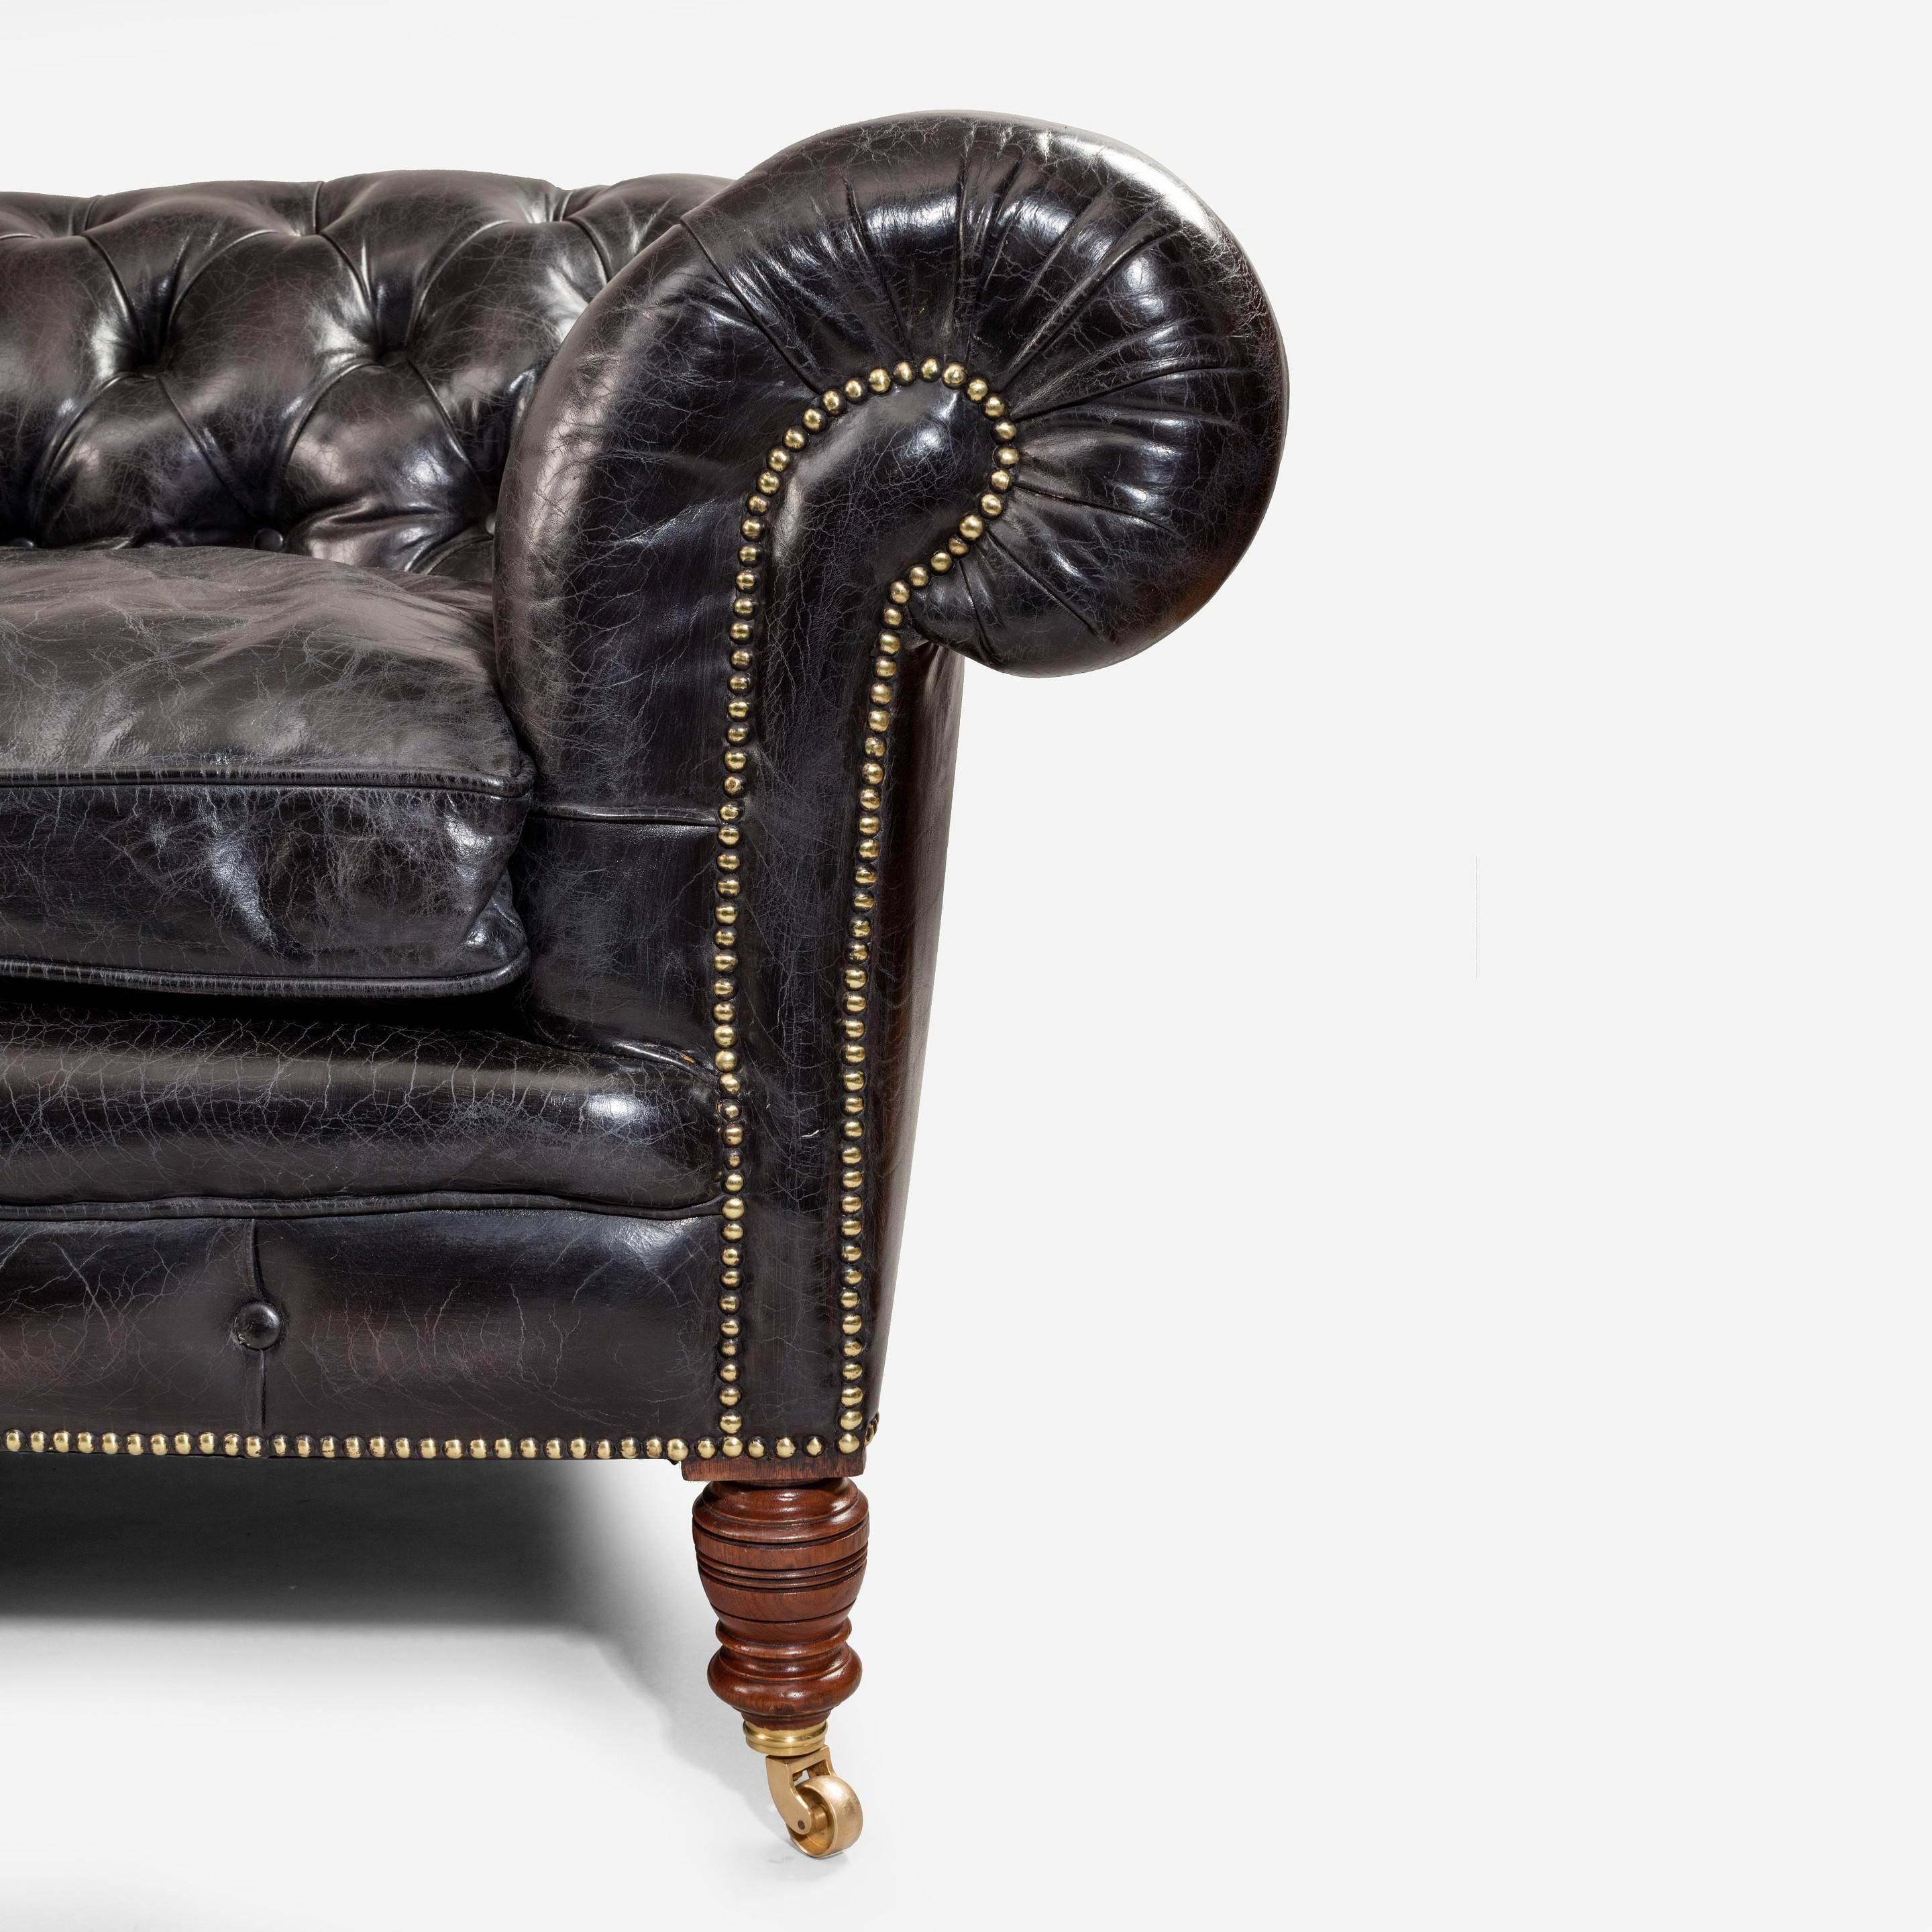 A fine late Victorian Chesterfield, of typical from with turned walnut legs and refurbished castors, reupholstered in deep buttoned distressed black leather.